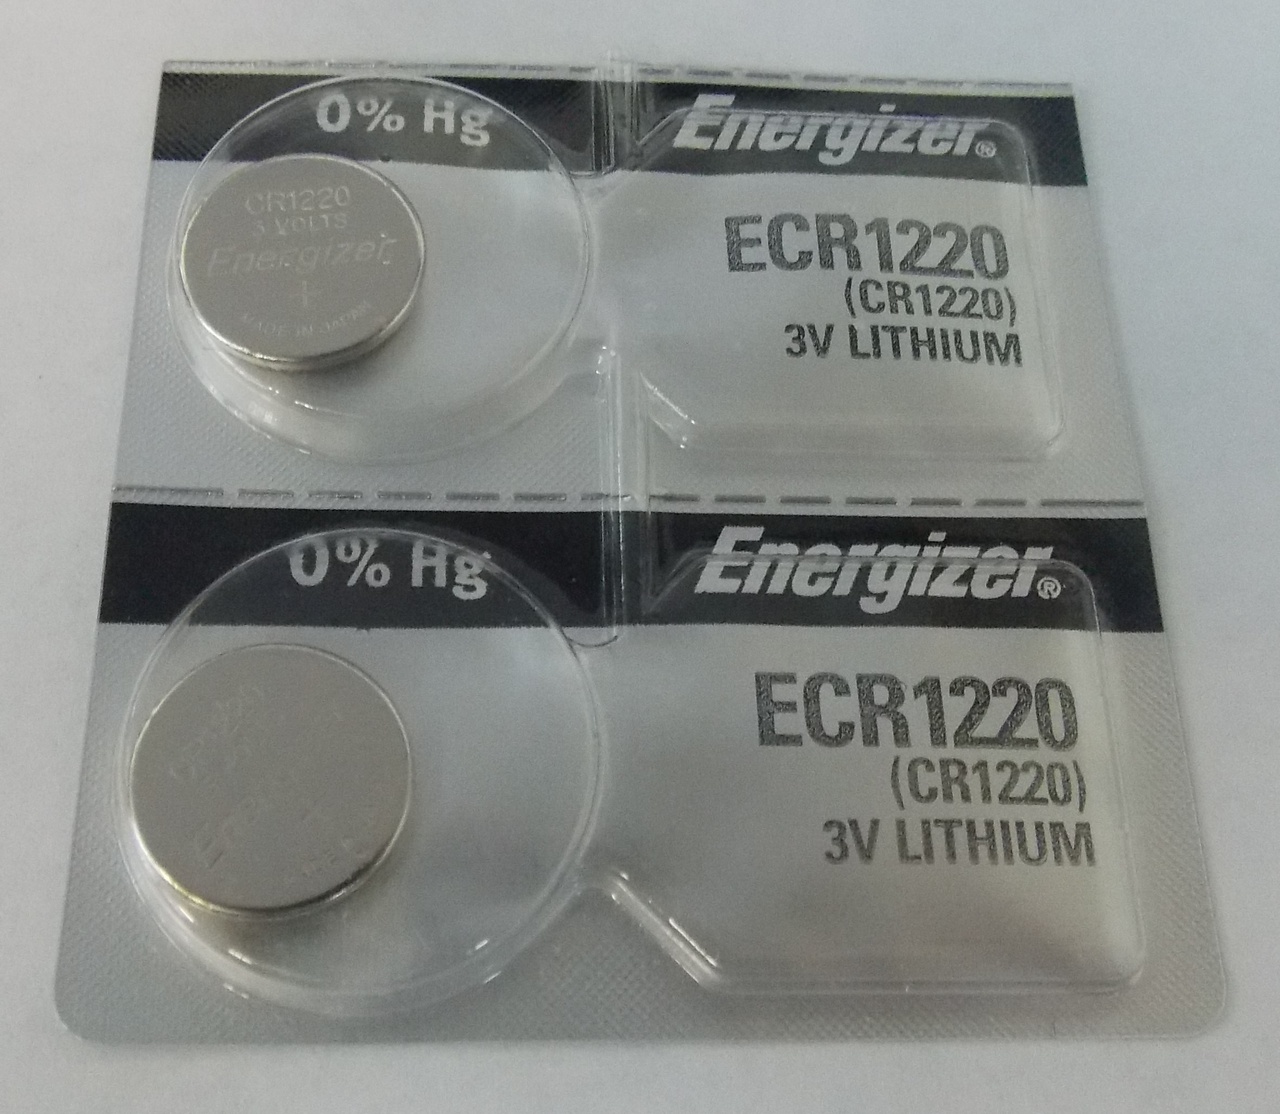 Energizer CR1220 3V Lithium Coin Battery - 2 Pack + FREE SHIPPING!